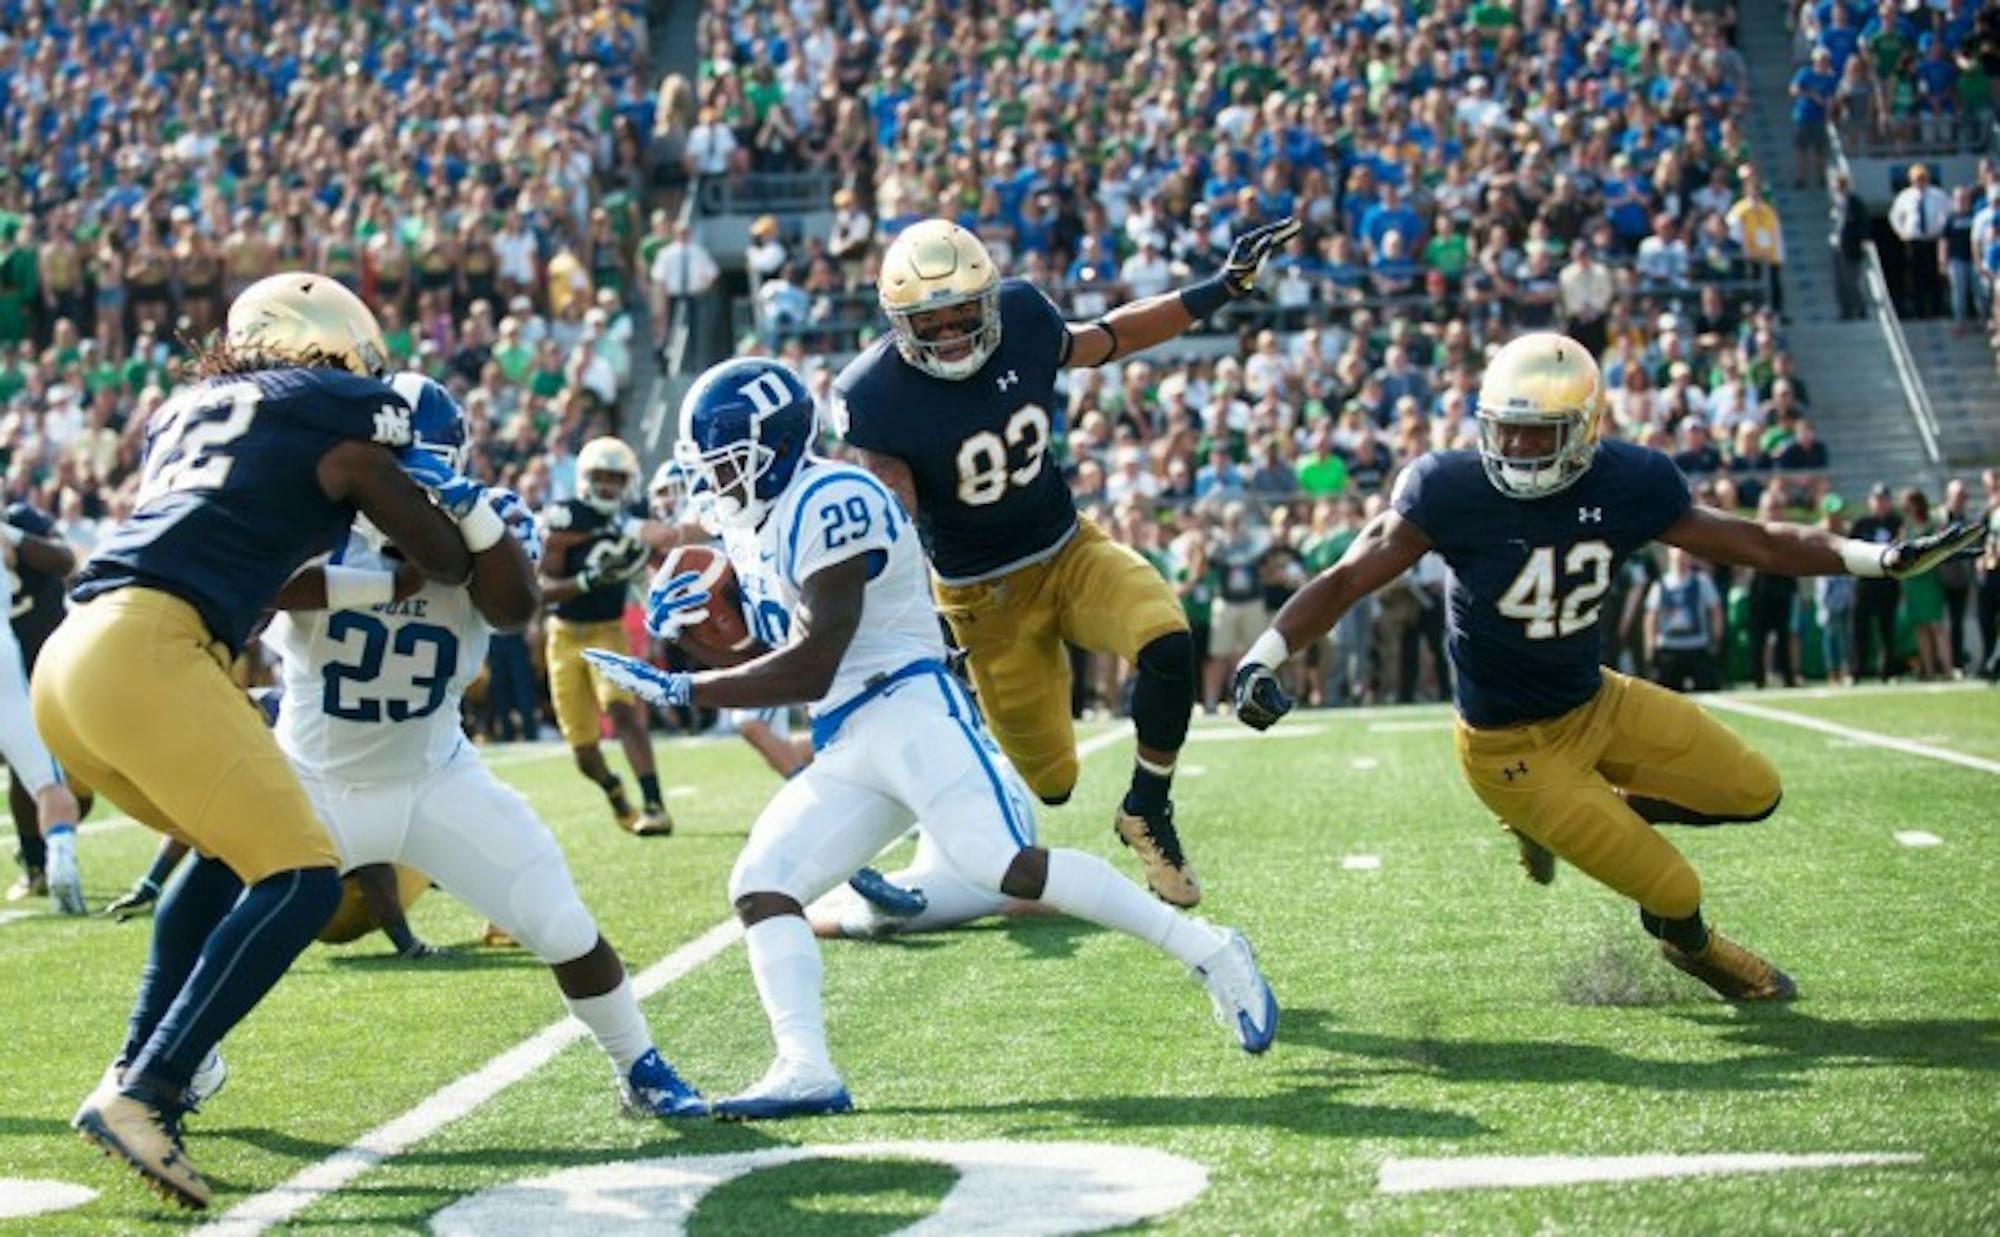 Irish sophomore linebacker Asmar Bilal tangles with a Duke defender in Notre Dame’s 38-35 loss to the Blue Devils on Saturday. Kelly said Tuesday that Bilal will see more playing time as the season progresses.